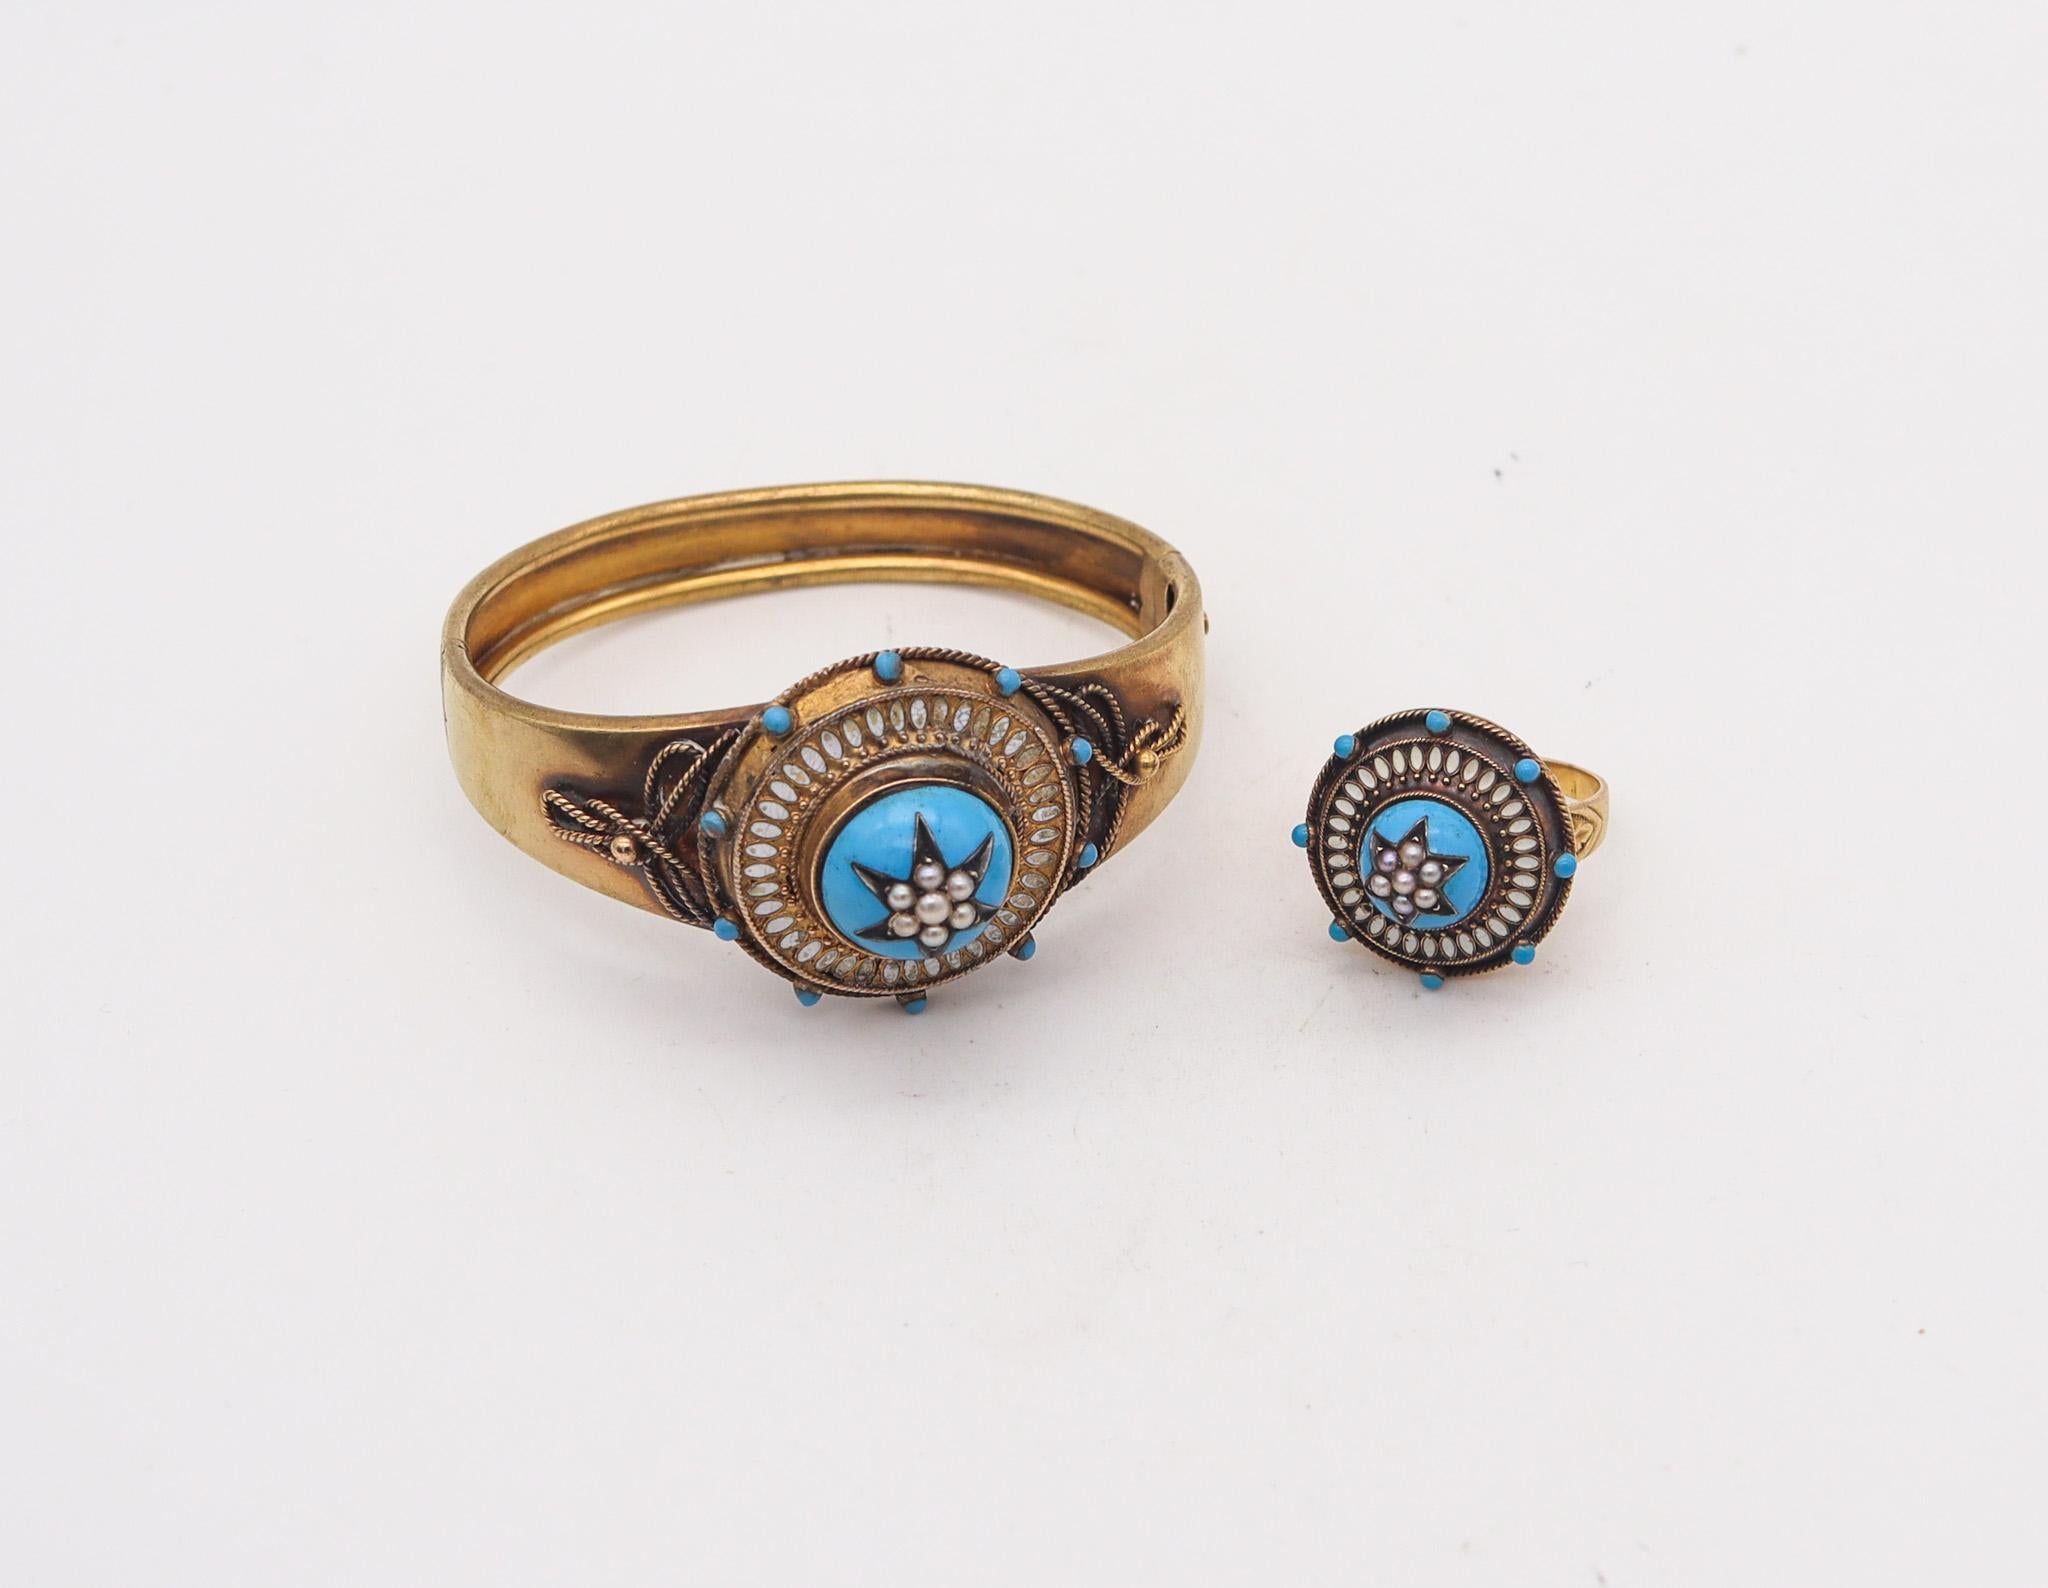 Women's Victorian 1870 Etruscan Revival Celestial Star Ring In 15Kt Gold With Pearls For Sale